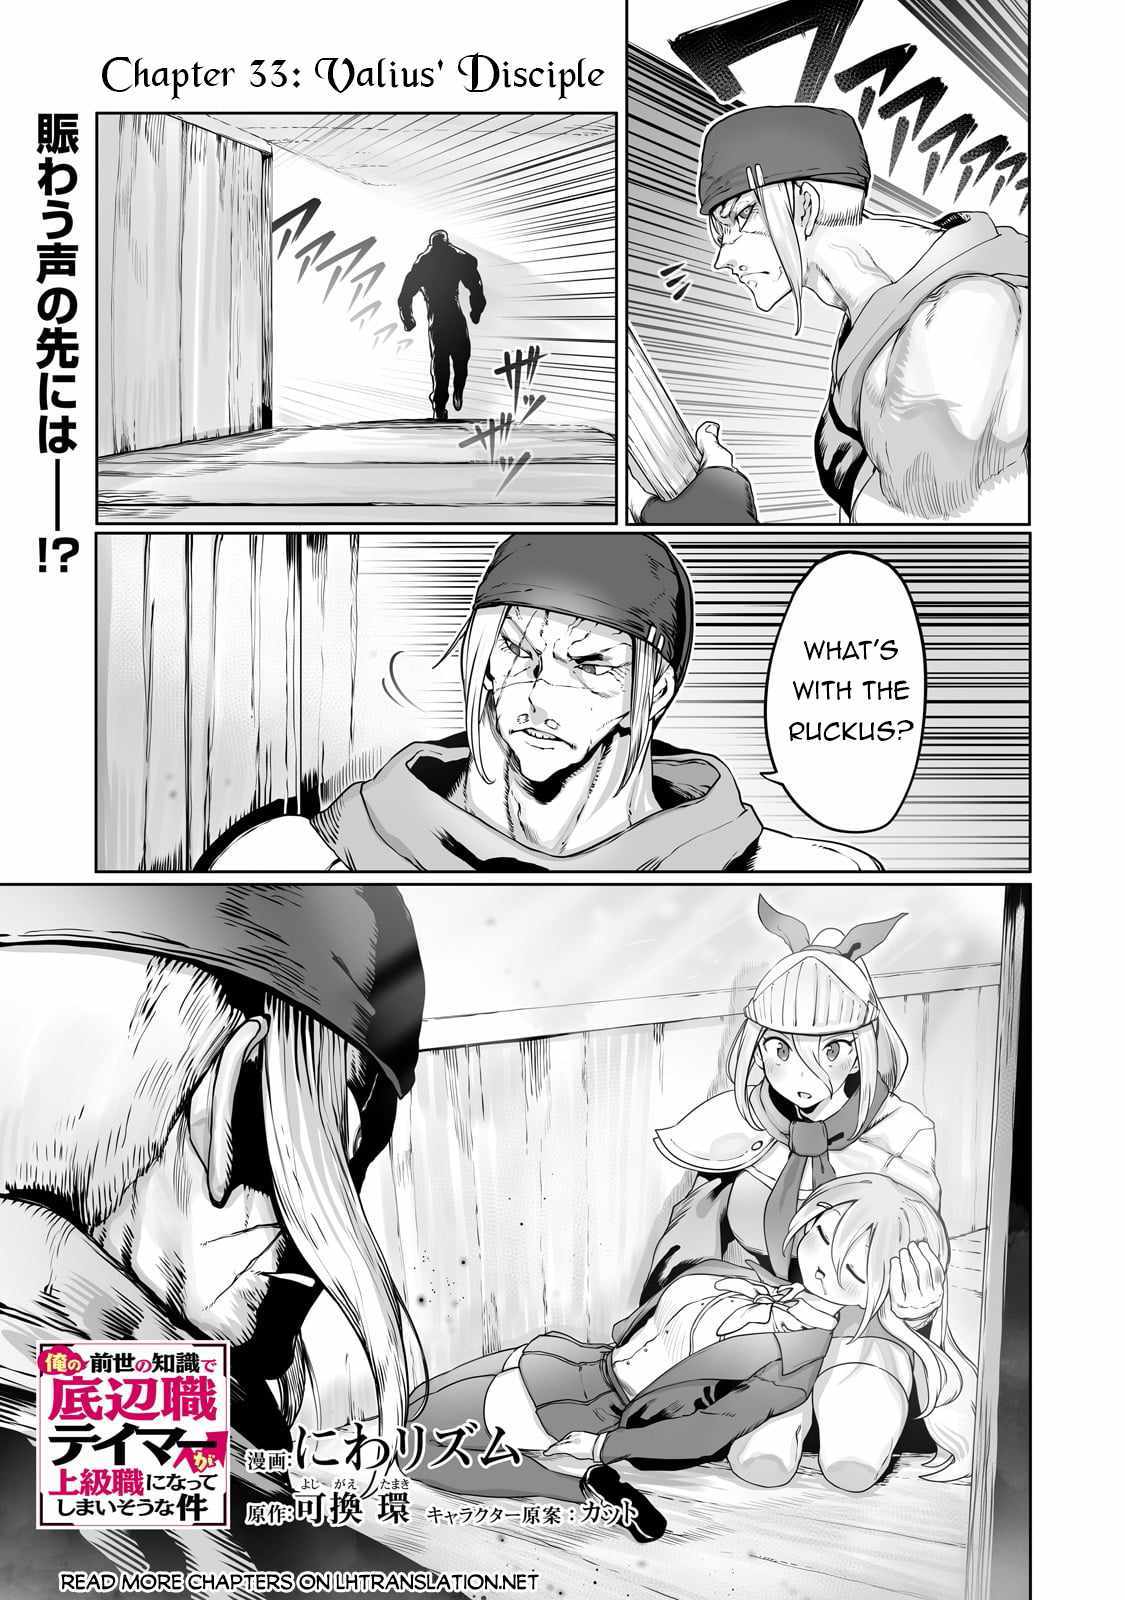 The Useless Tamer Will Turn Into The Top Unconsciously By My Previous Life Knowledge - 33 page 2-4df0e967